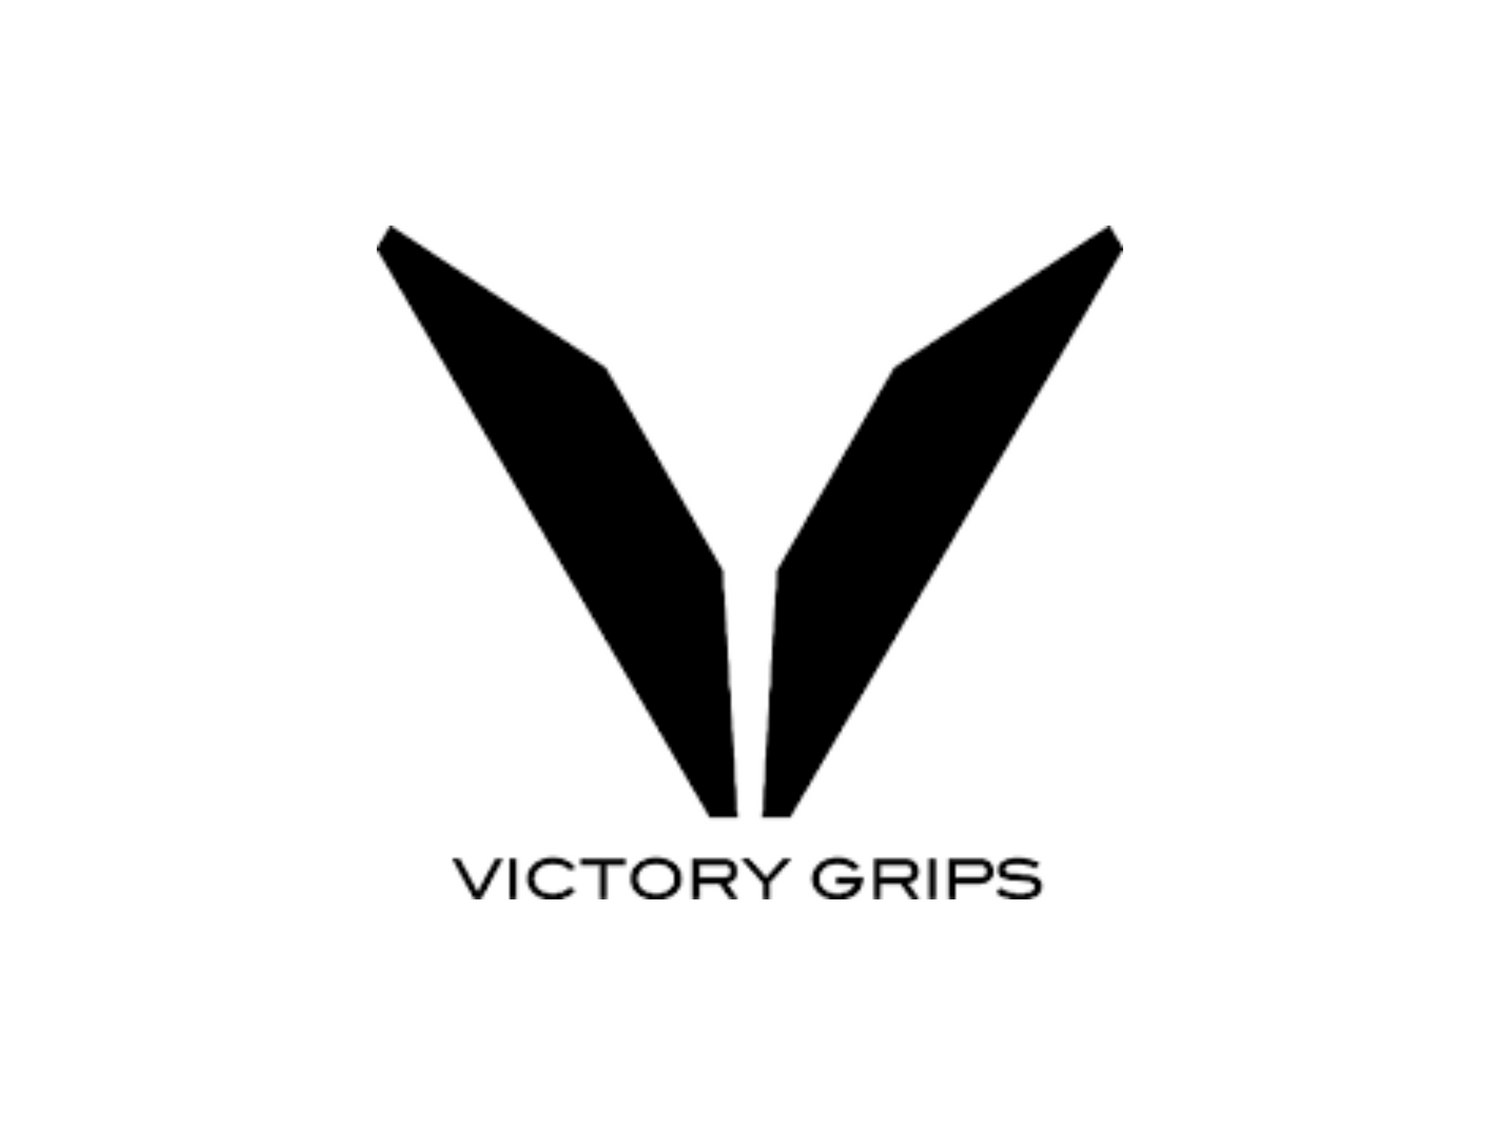 VICTORY GRIPS